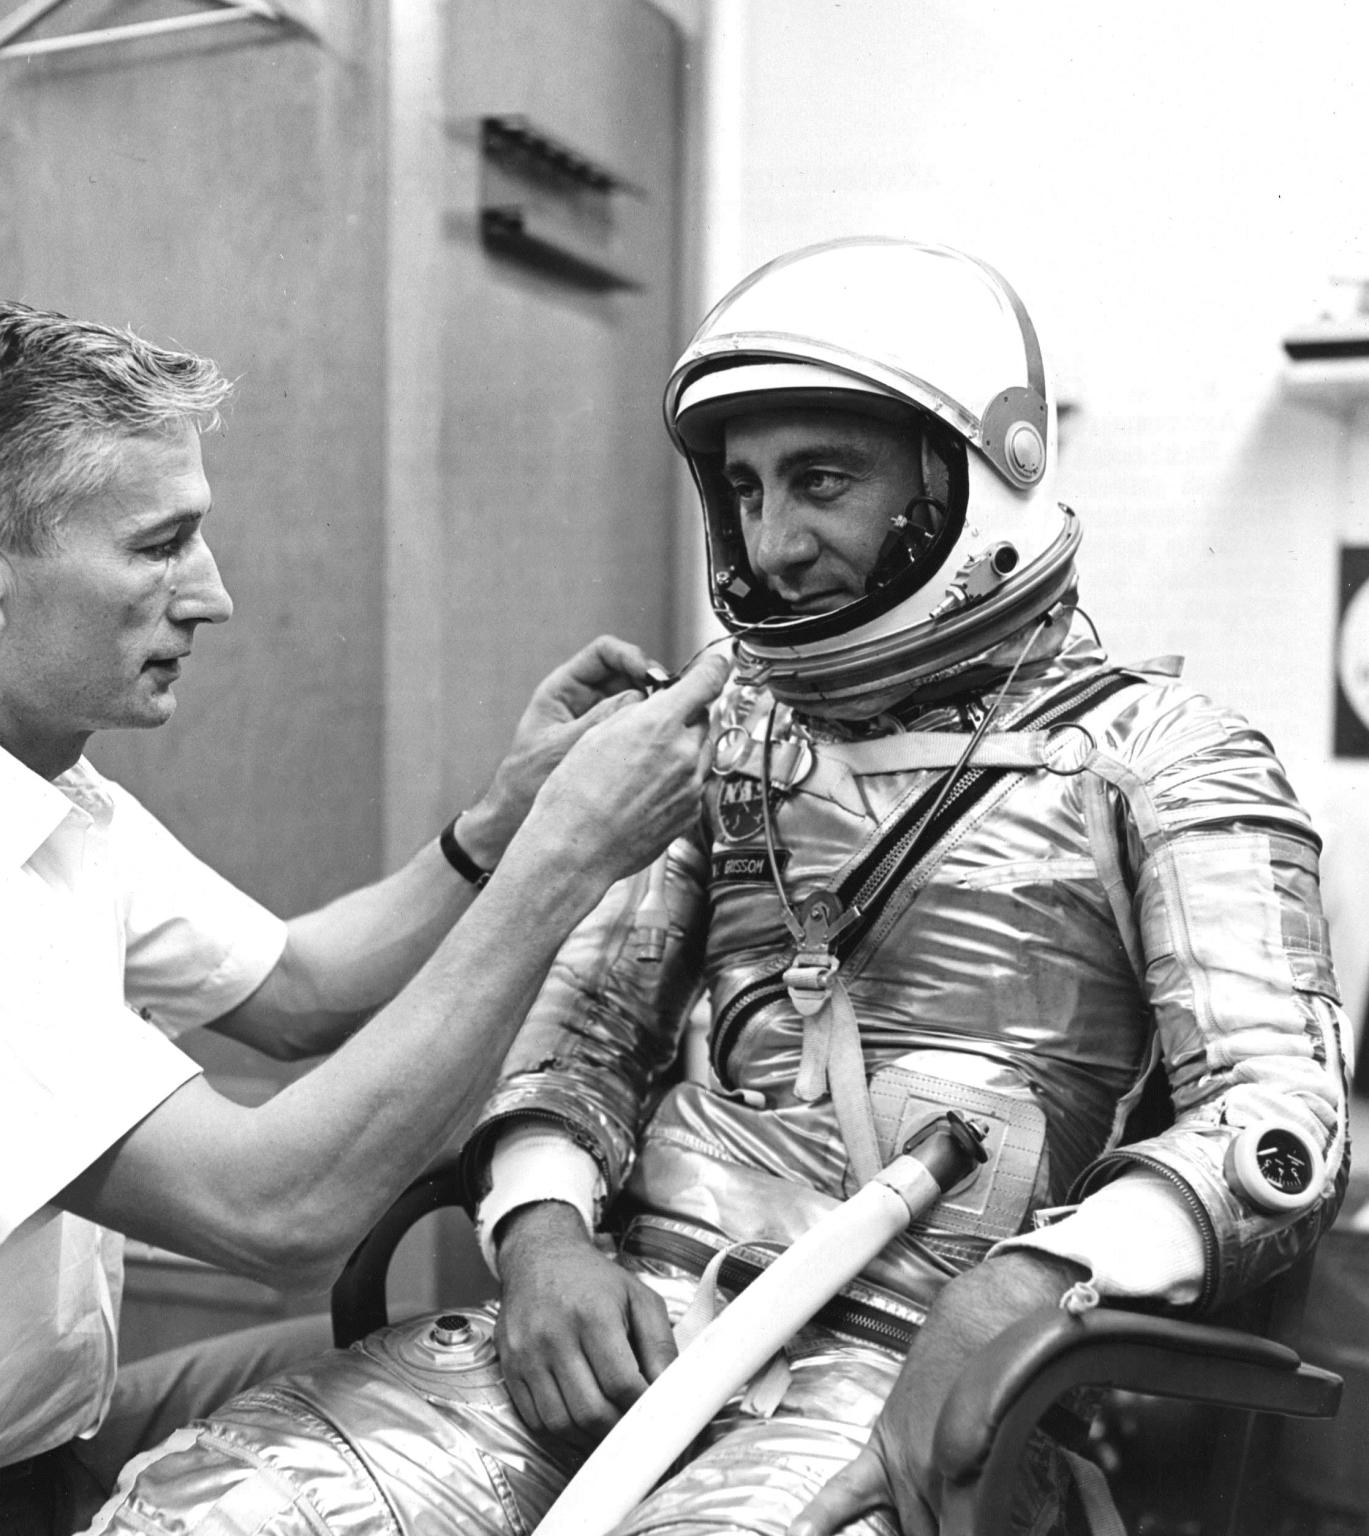 Project Mercury pressure suit specialist Joseph W. Schmitt adjusts a respirometer attached to the helmet of astronaut Virgil I. Grissom during a dress rehearsal for the second manned suborbital flight, dubbed Liberty Bell 7.